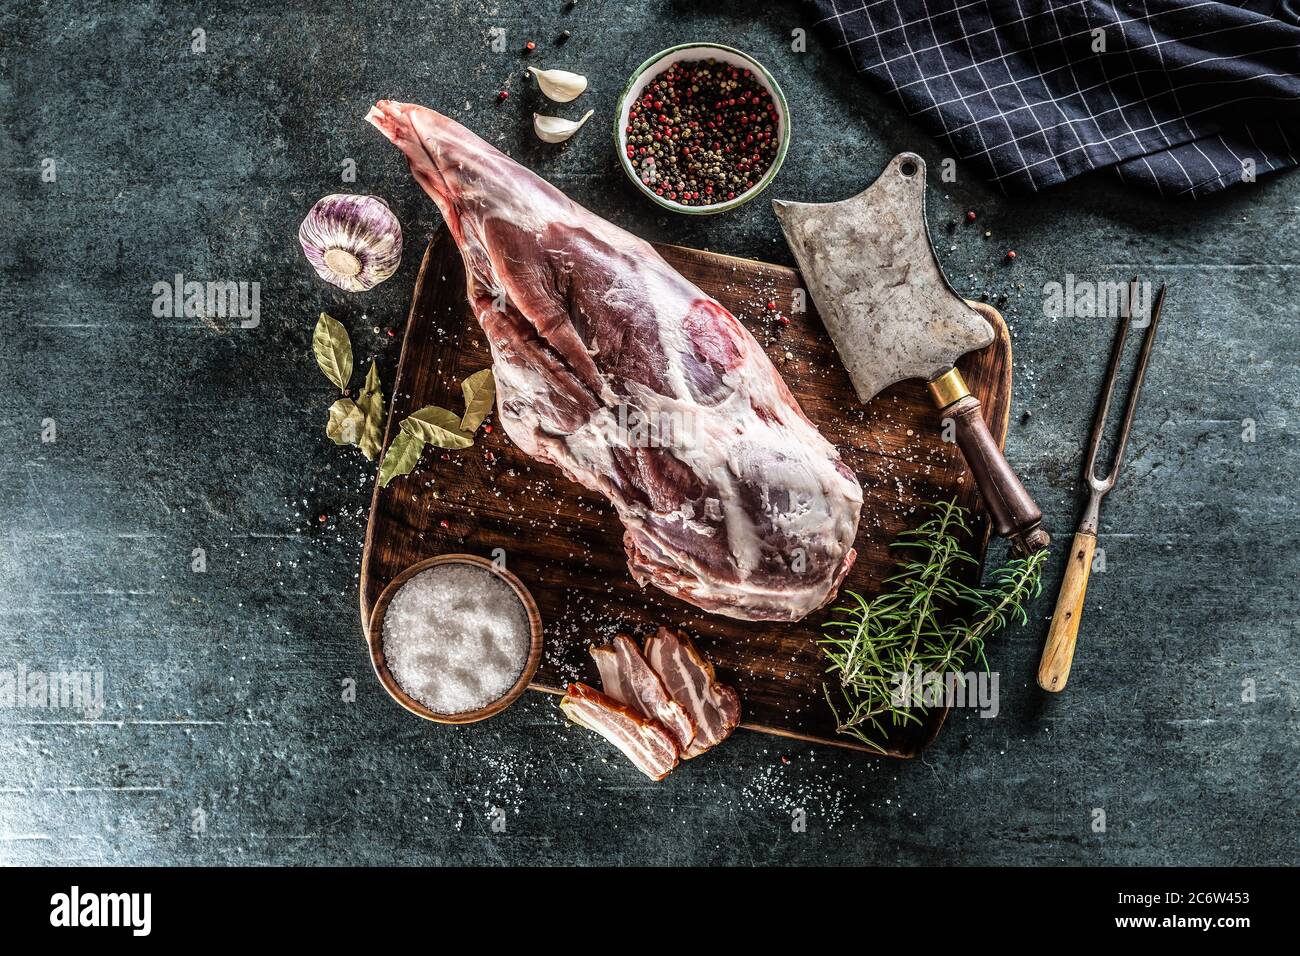 Raw lamb thigh surrounded by salt, pepper, garlic, bacon and rosemary on a vinateg surface Stock Photo